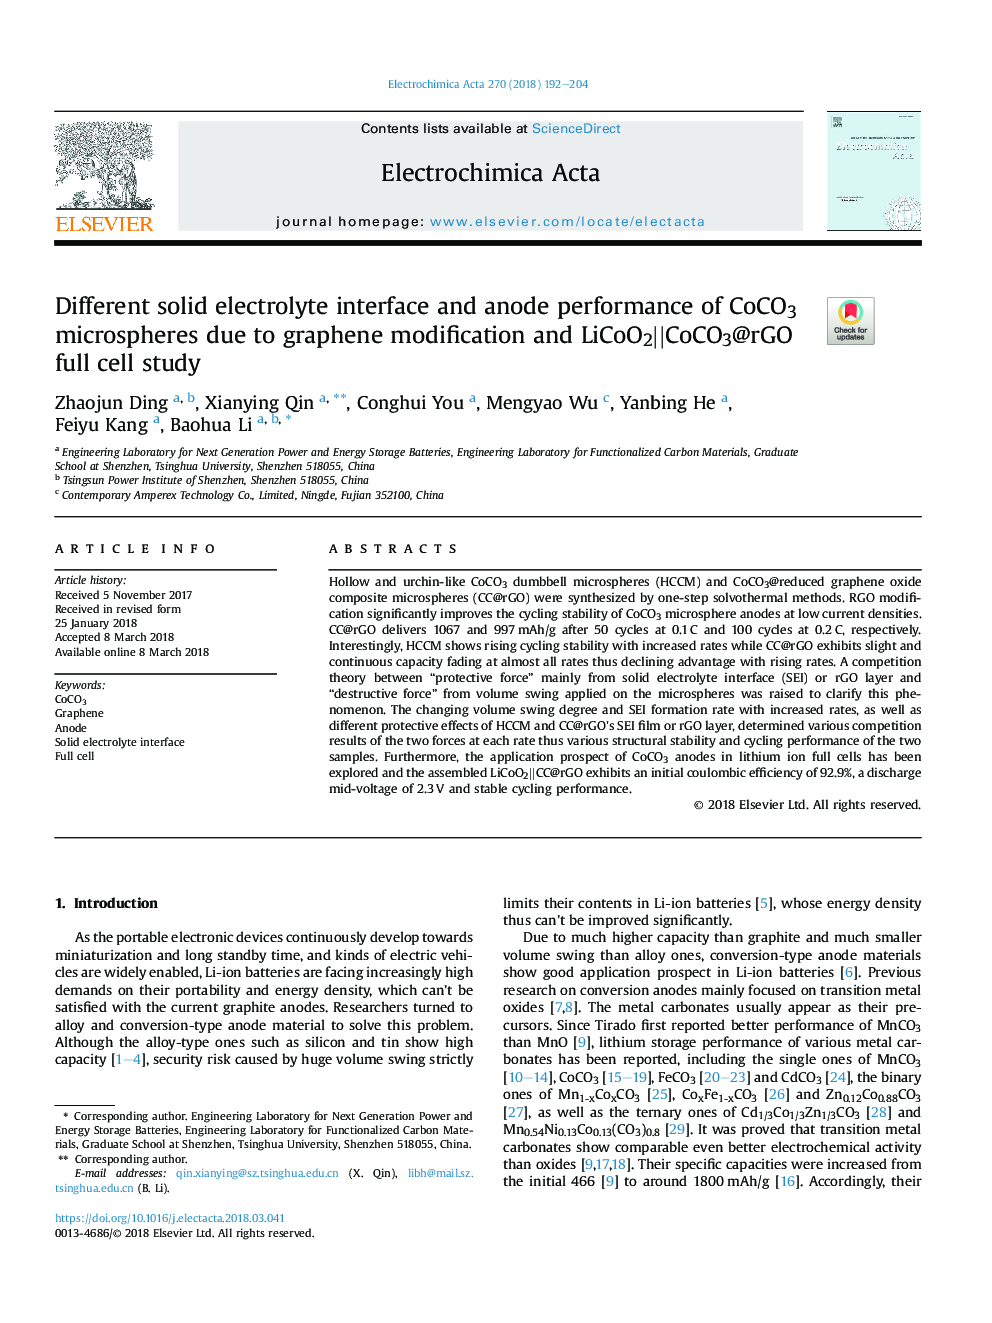 Different solid electrolyte interface and anode performance of CoCO3 microspheres due to graphene modification and LiCoO2||CoCO3@rGO full cell study